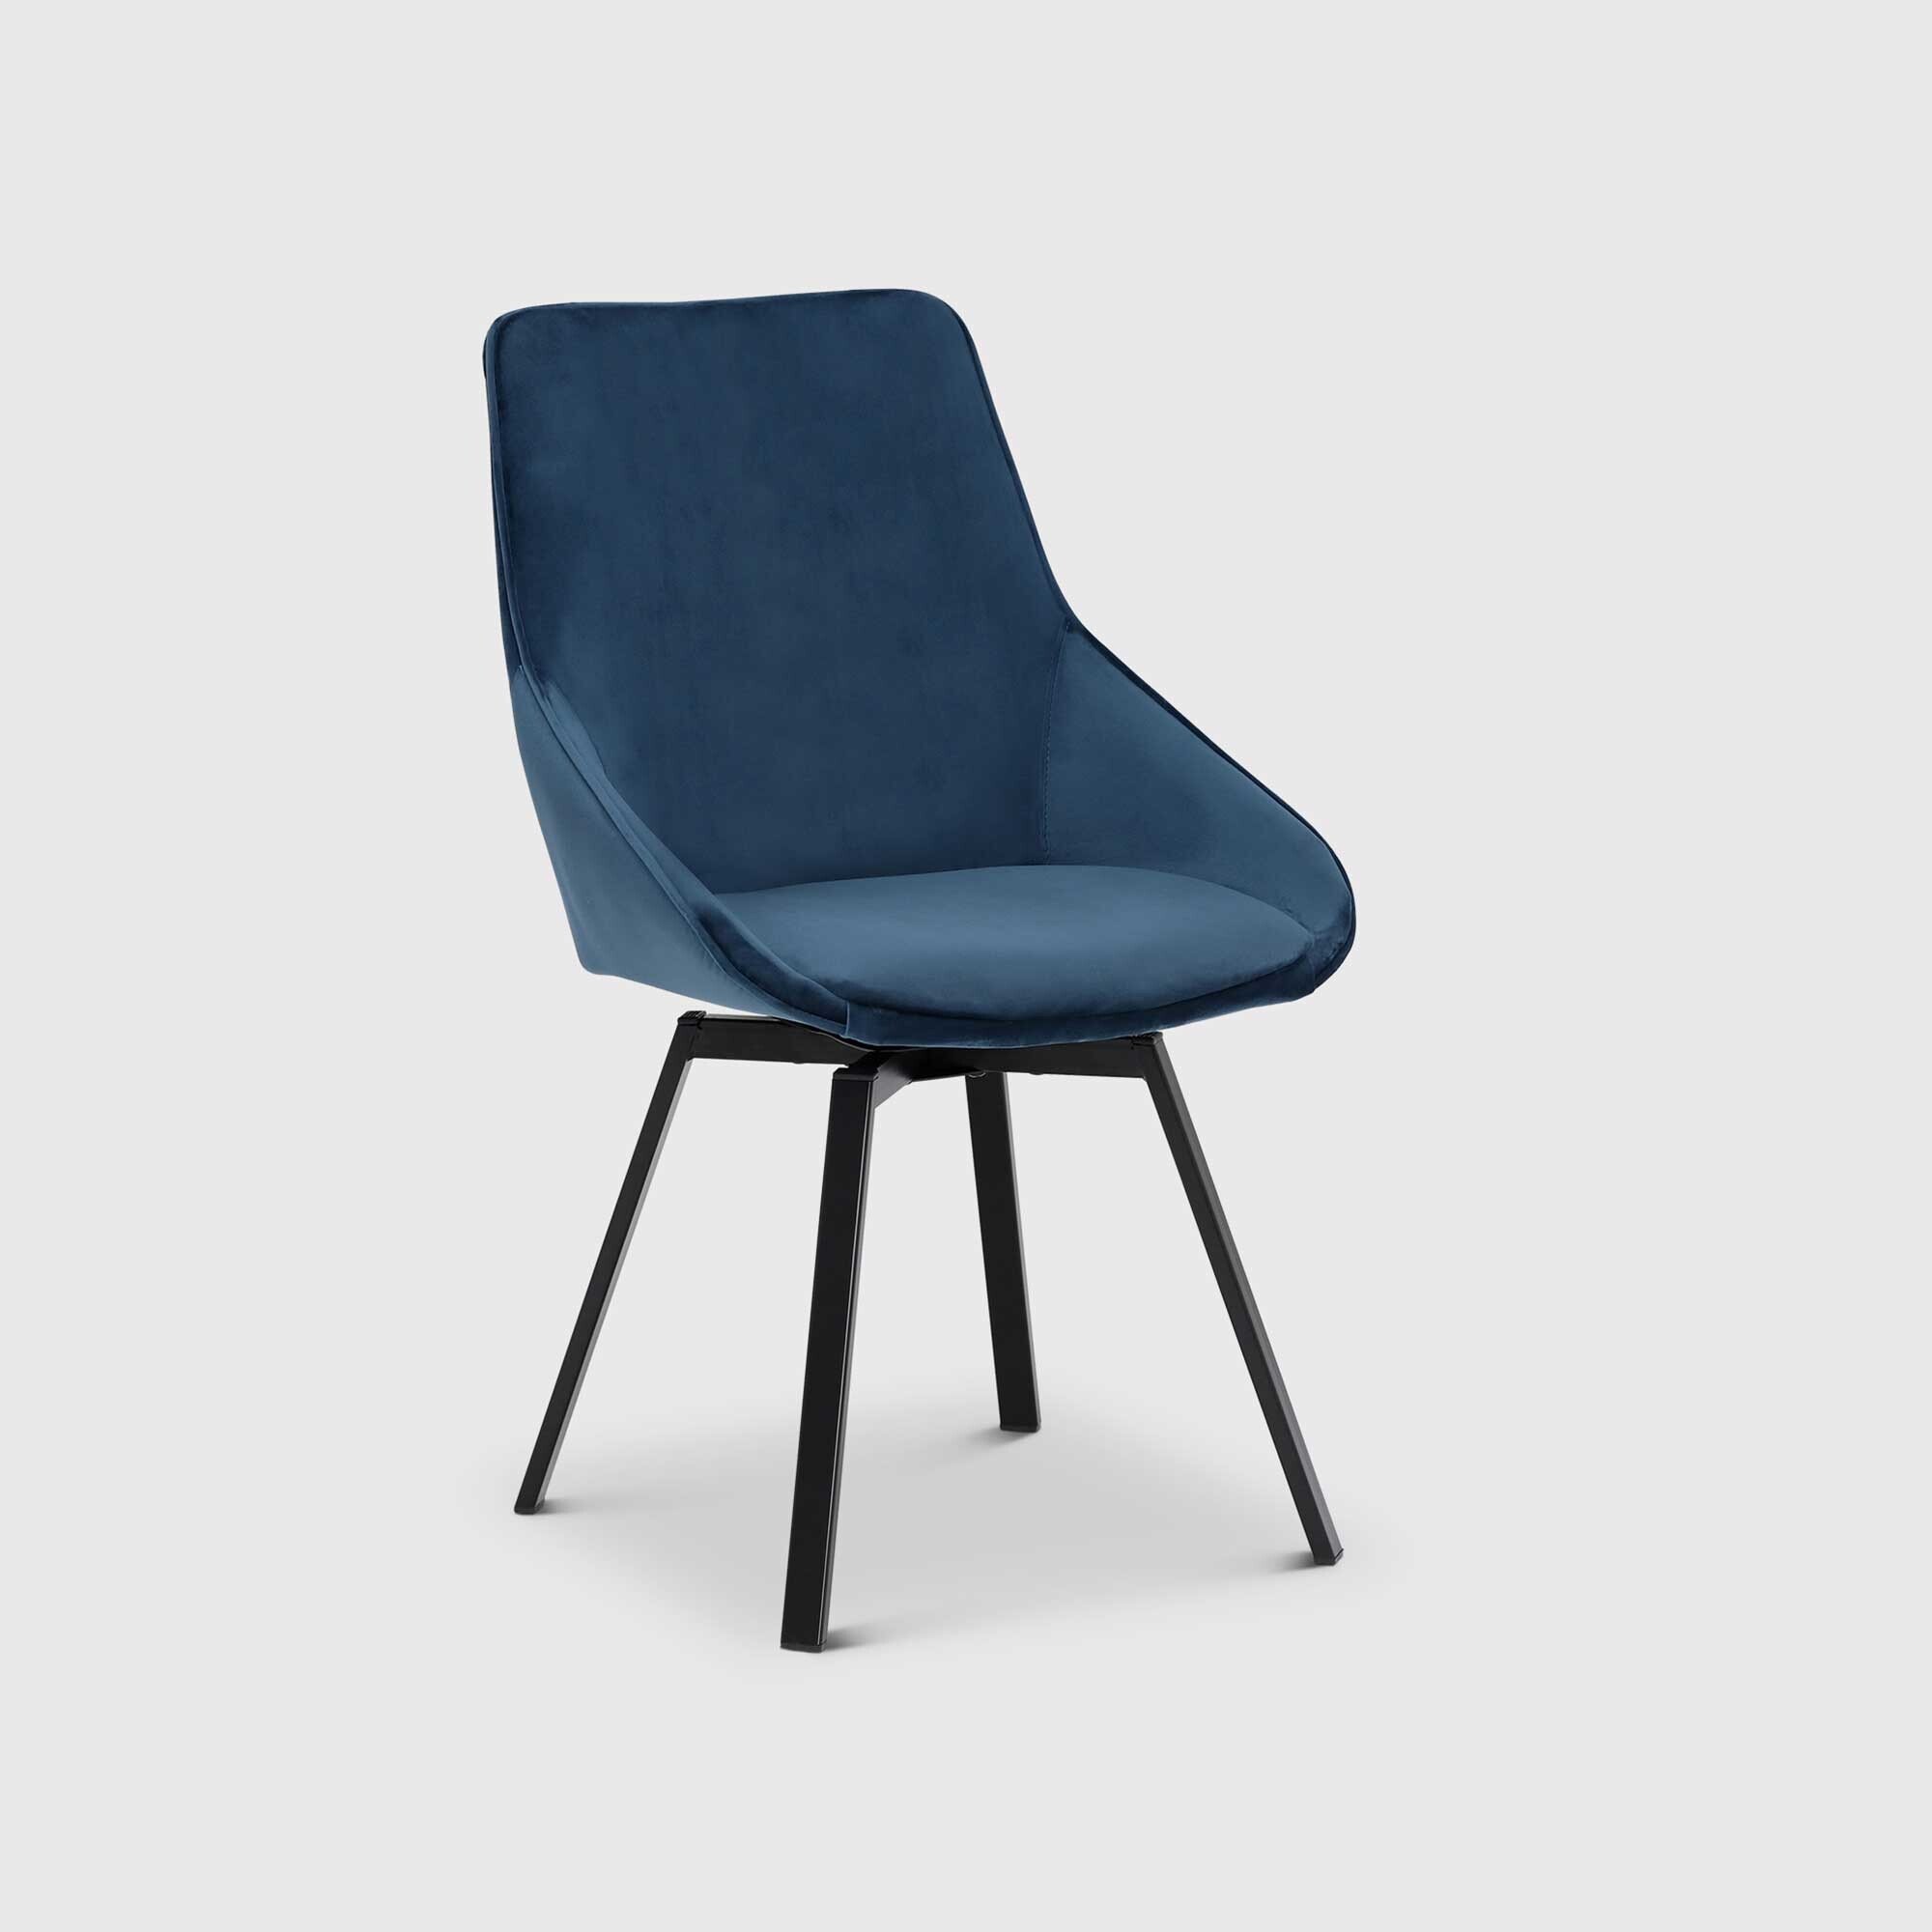 Beckton Leisure Dining Swivel Dining Chair, Blue | Barker & Stonehouse